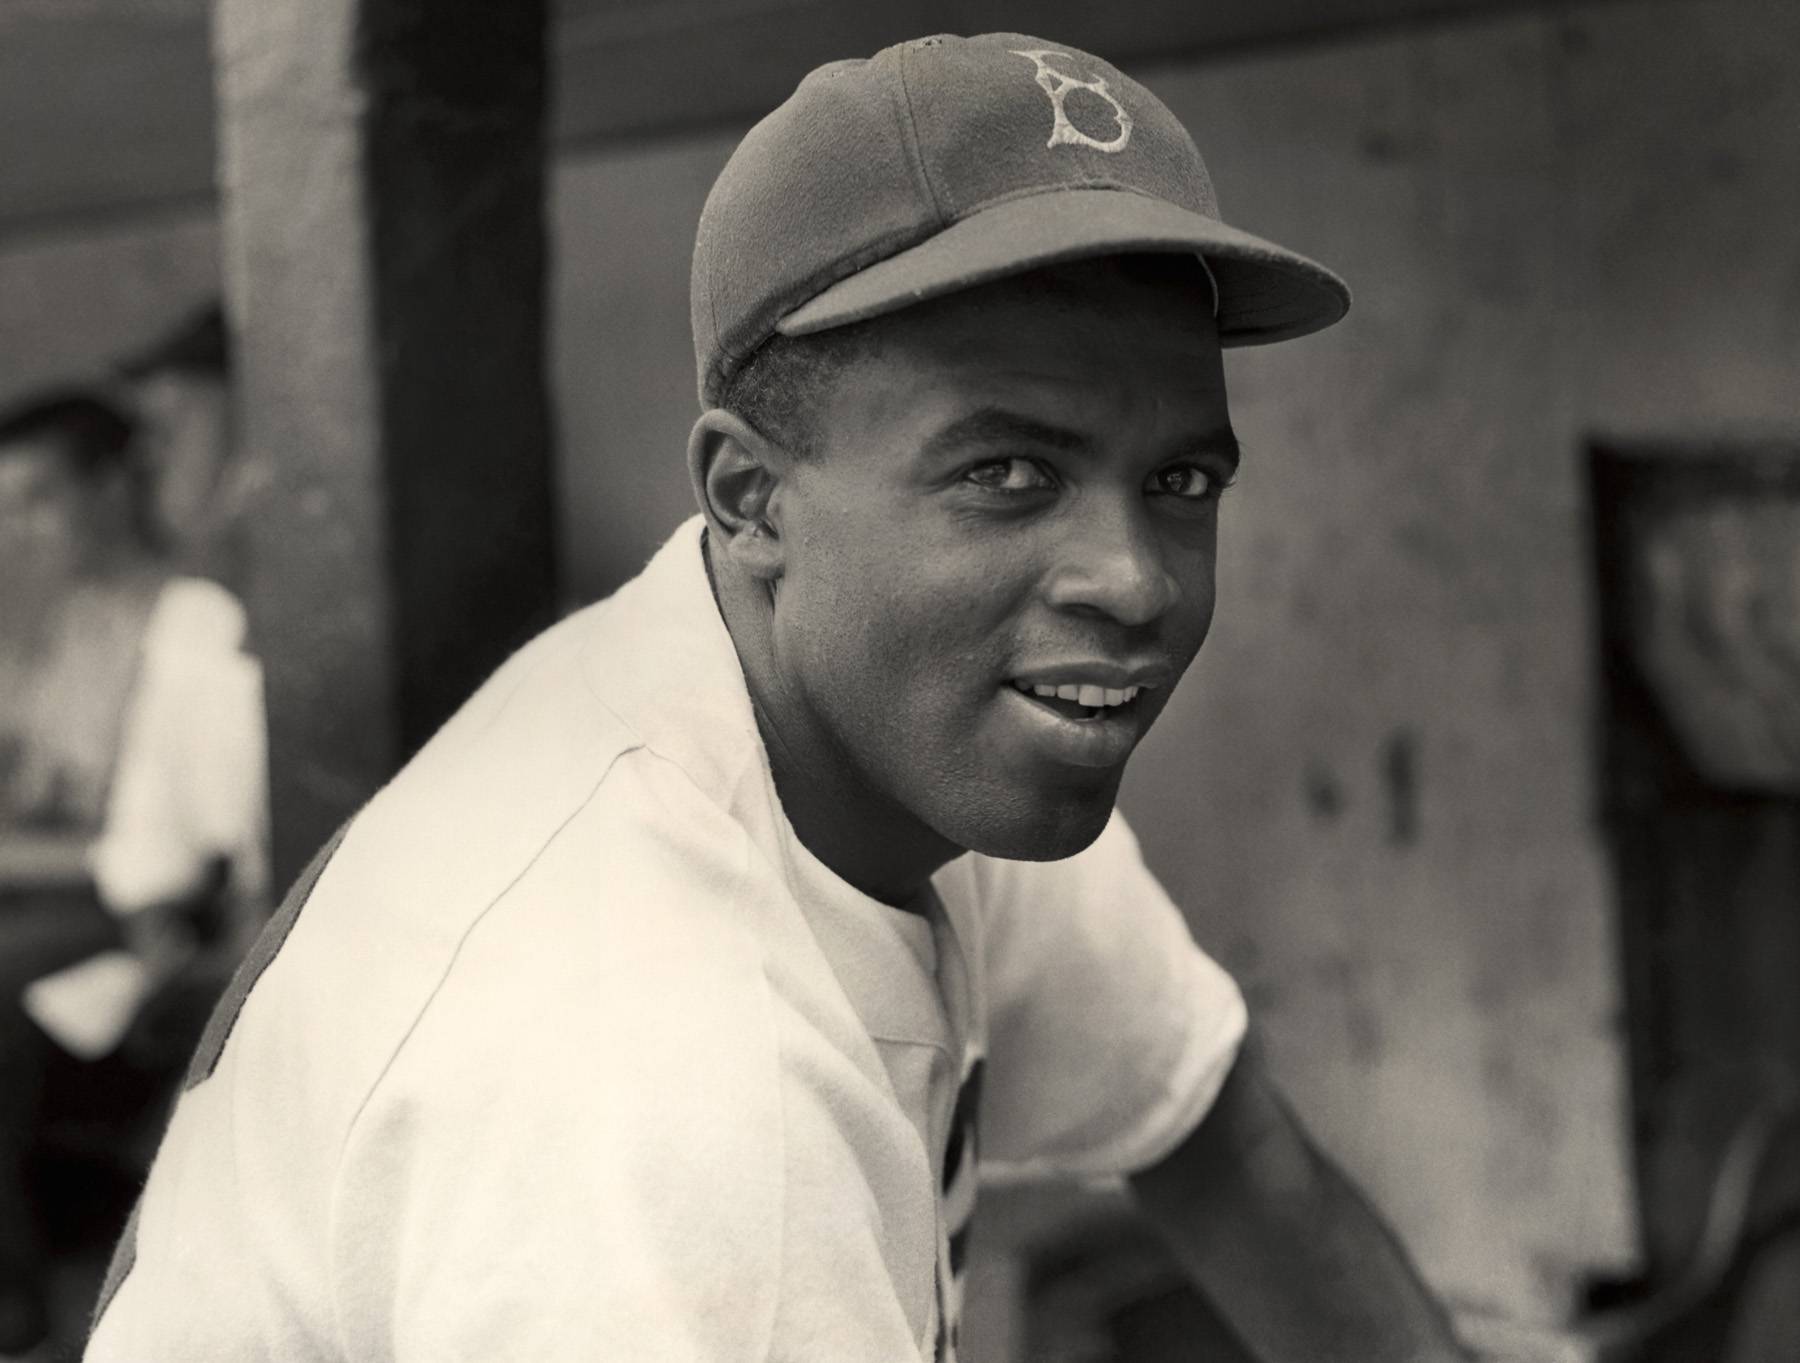 Jackie Robinson - There is no other athlete more associated with the term “breaking the color barrier” than Jackie Robinson, who became the first Black player in major league baseball when he signed on to play with the Brooklyn Dodgers in 1947.&nbsp;(Photo: Hulton Archive/Getty Images)